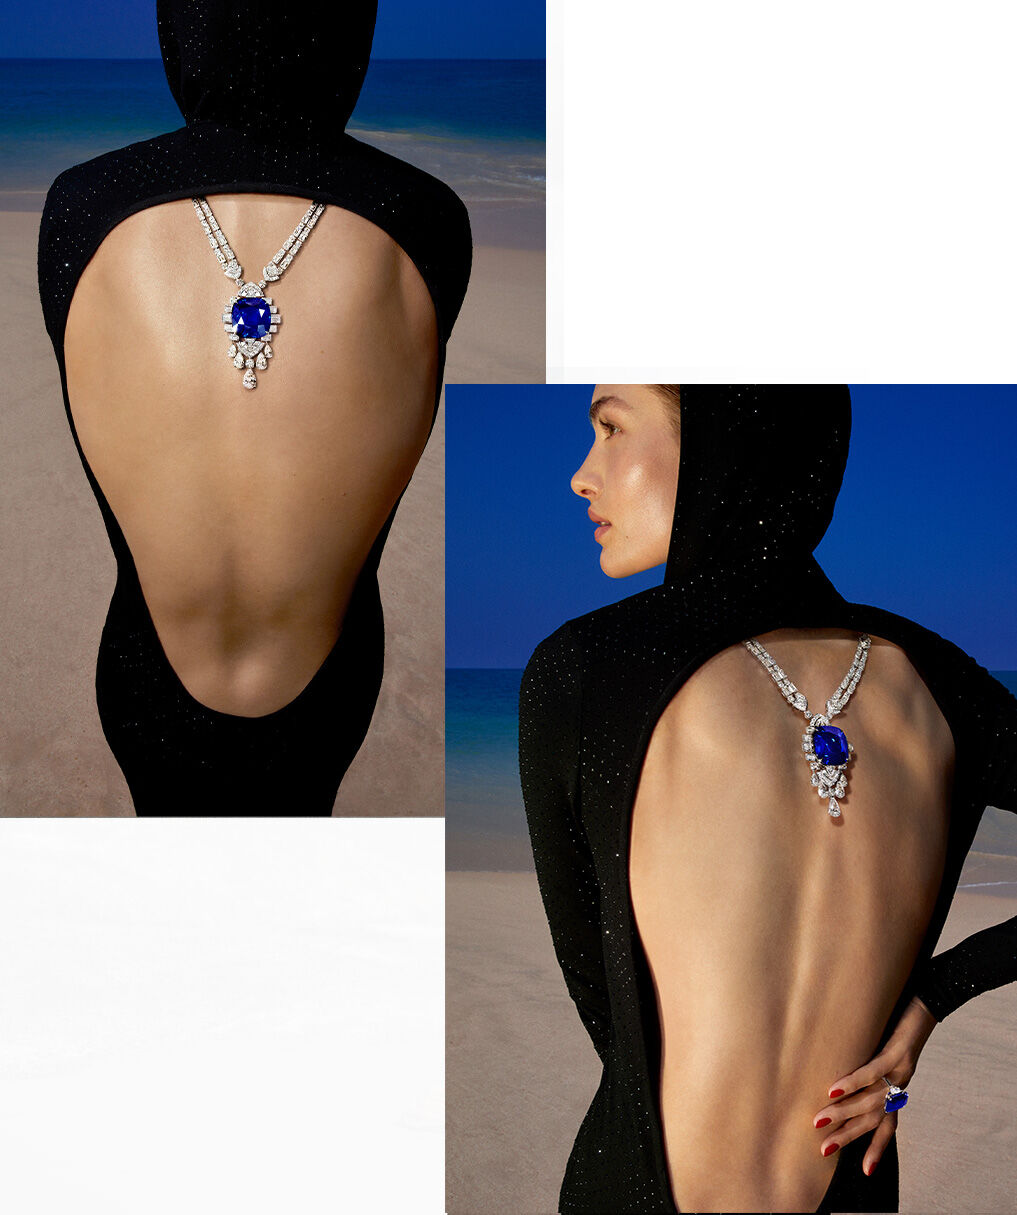 Side by side images of model wearing sapphire and white diamond high jewellery